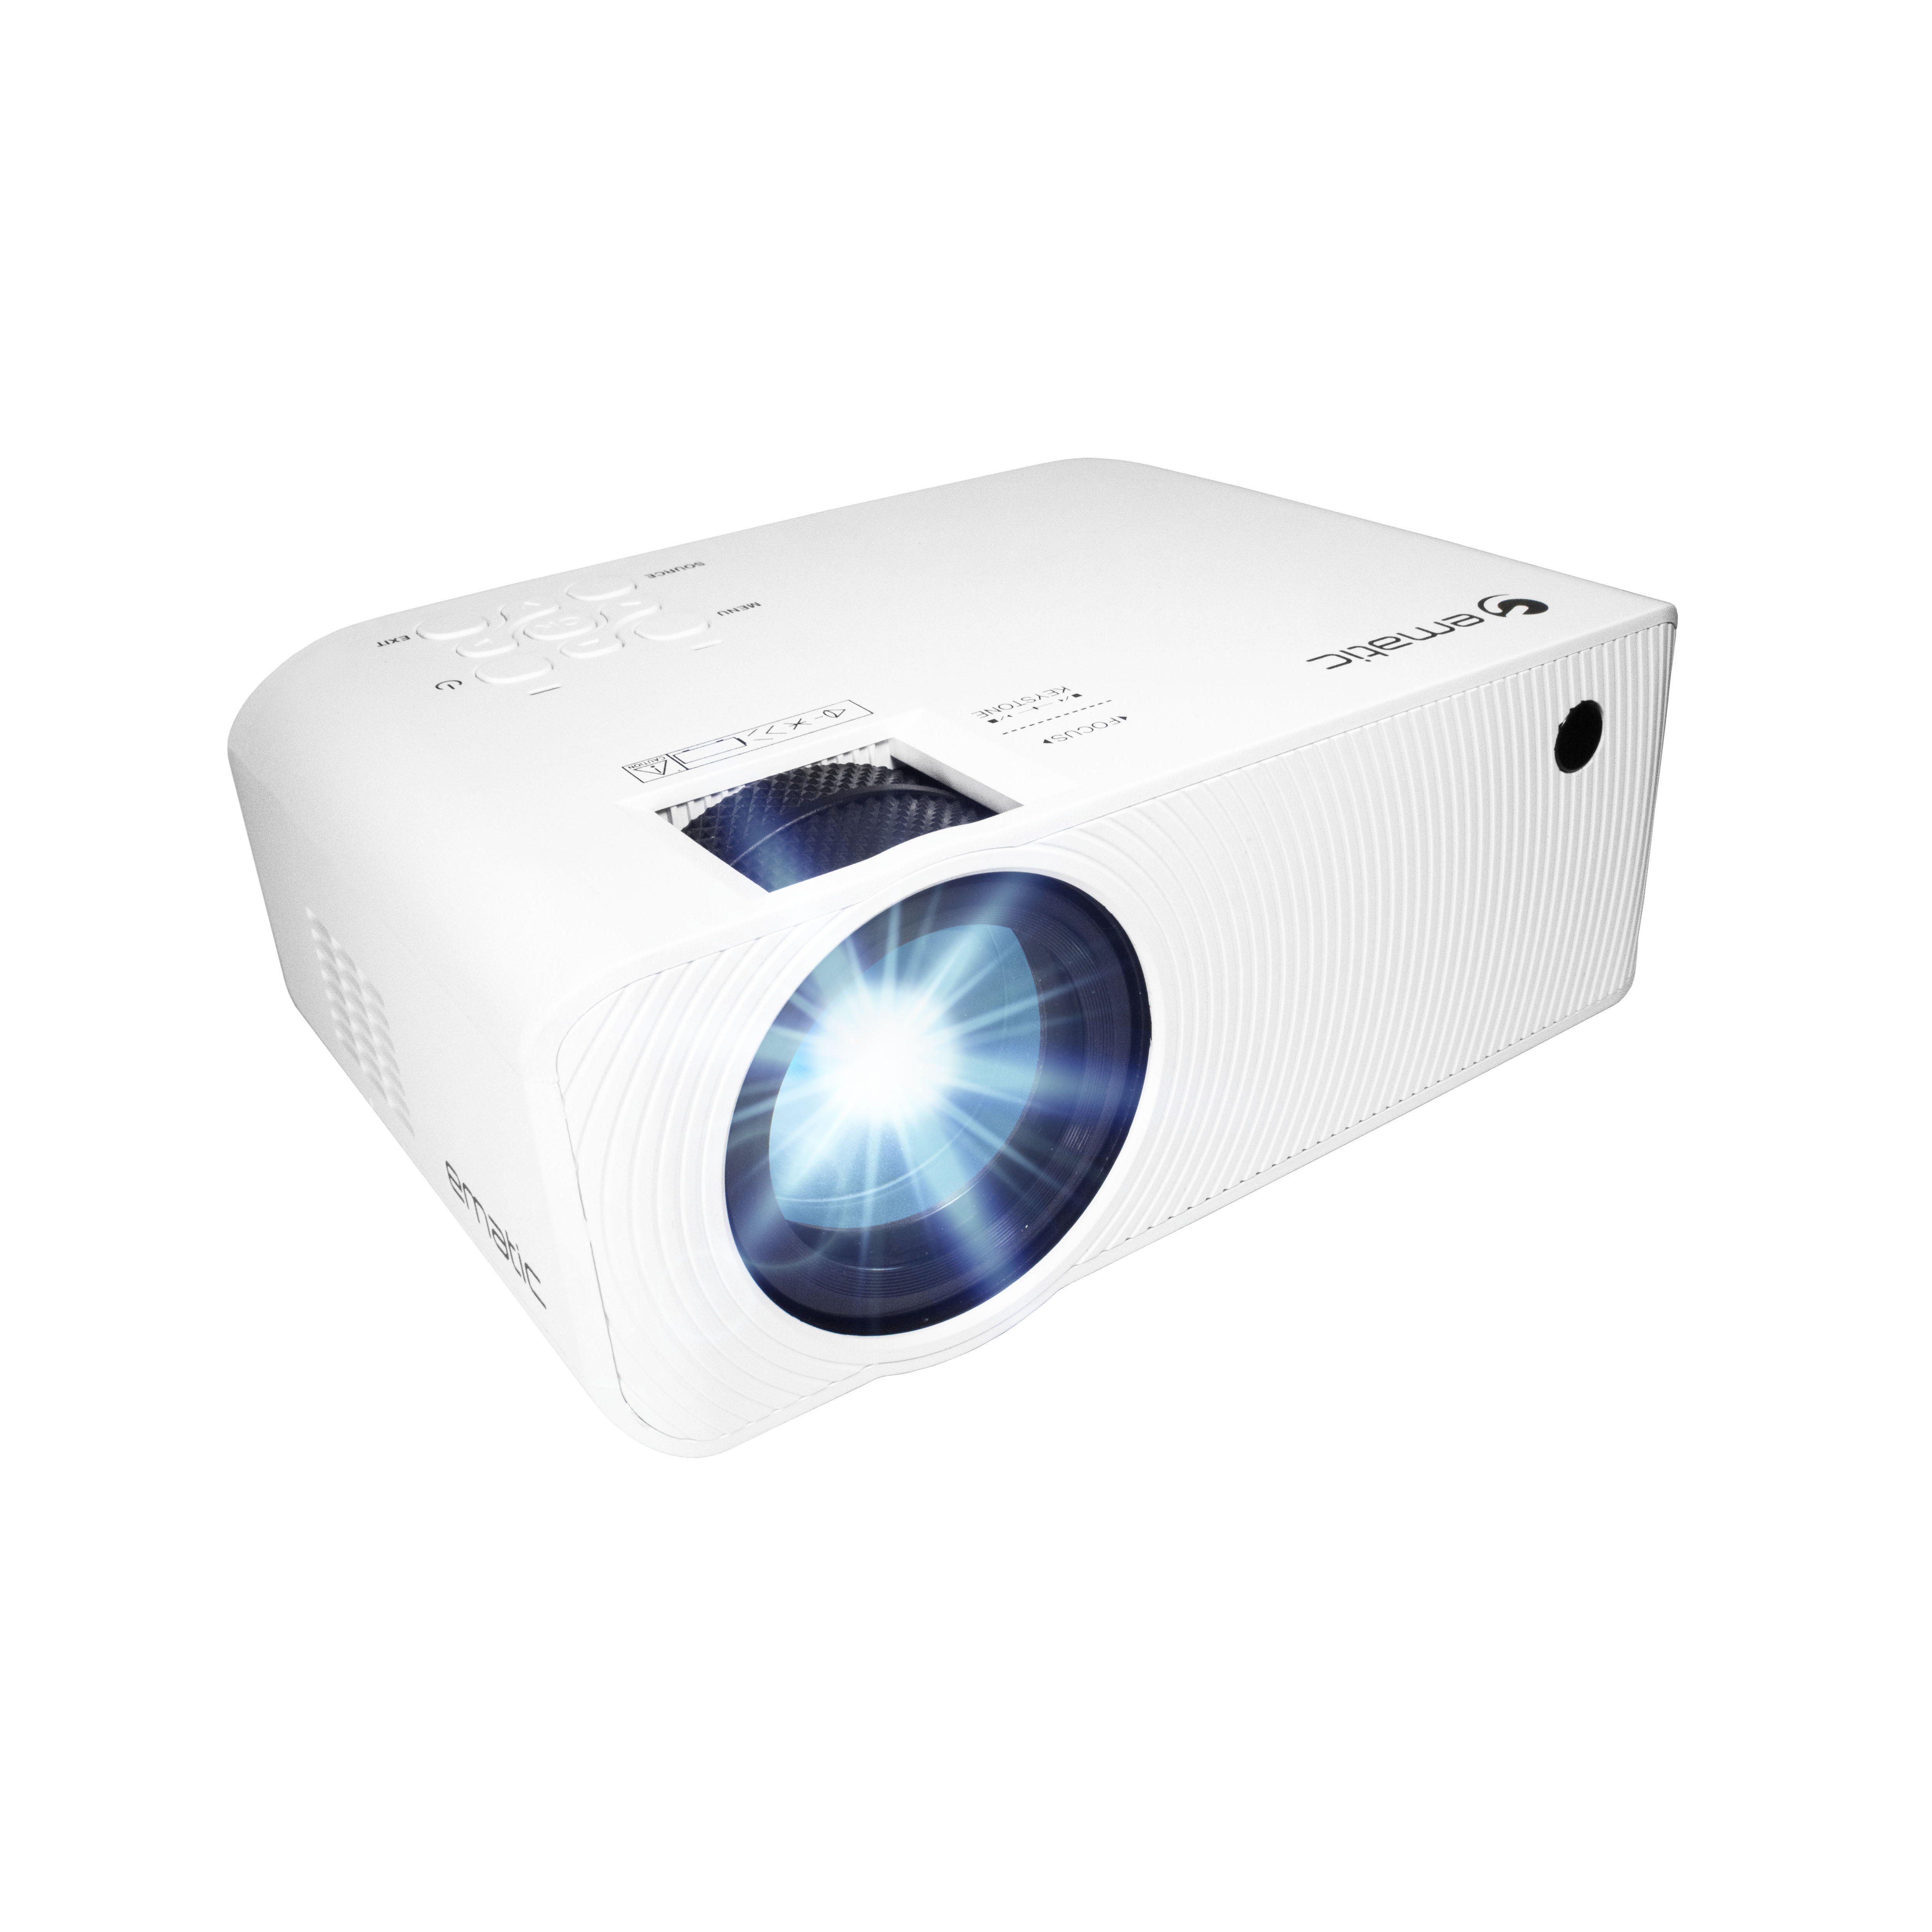 Ematic EPJ720P 150 HD Pro 720P Home Theater Projector - image 1 of 14